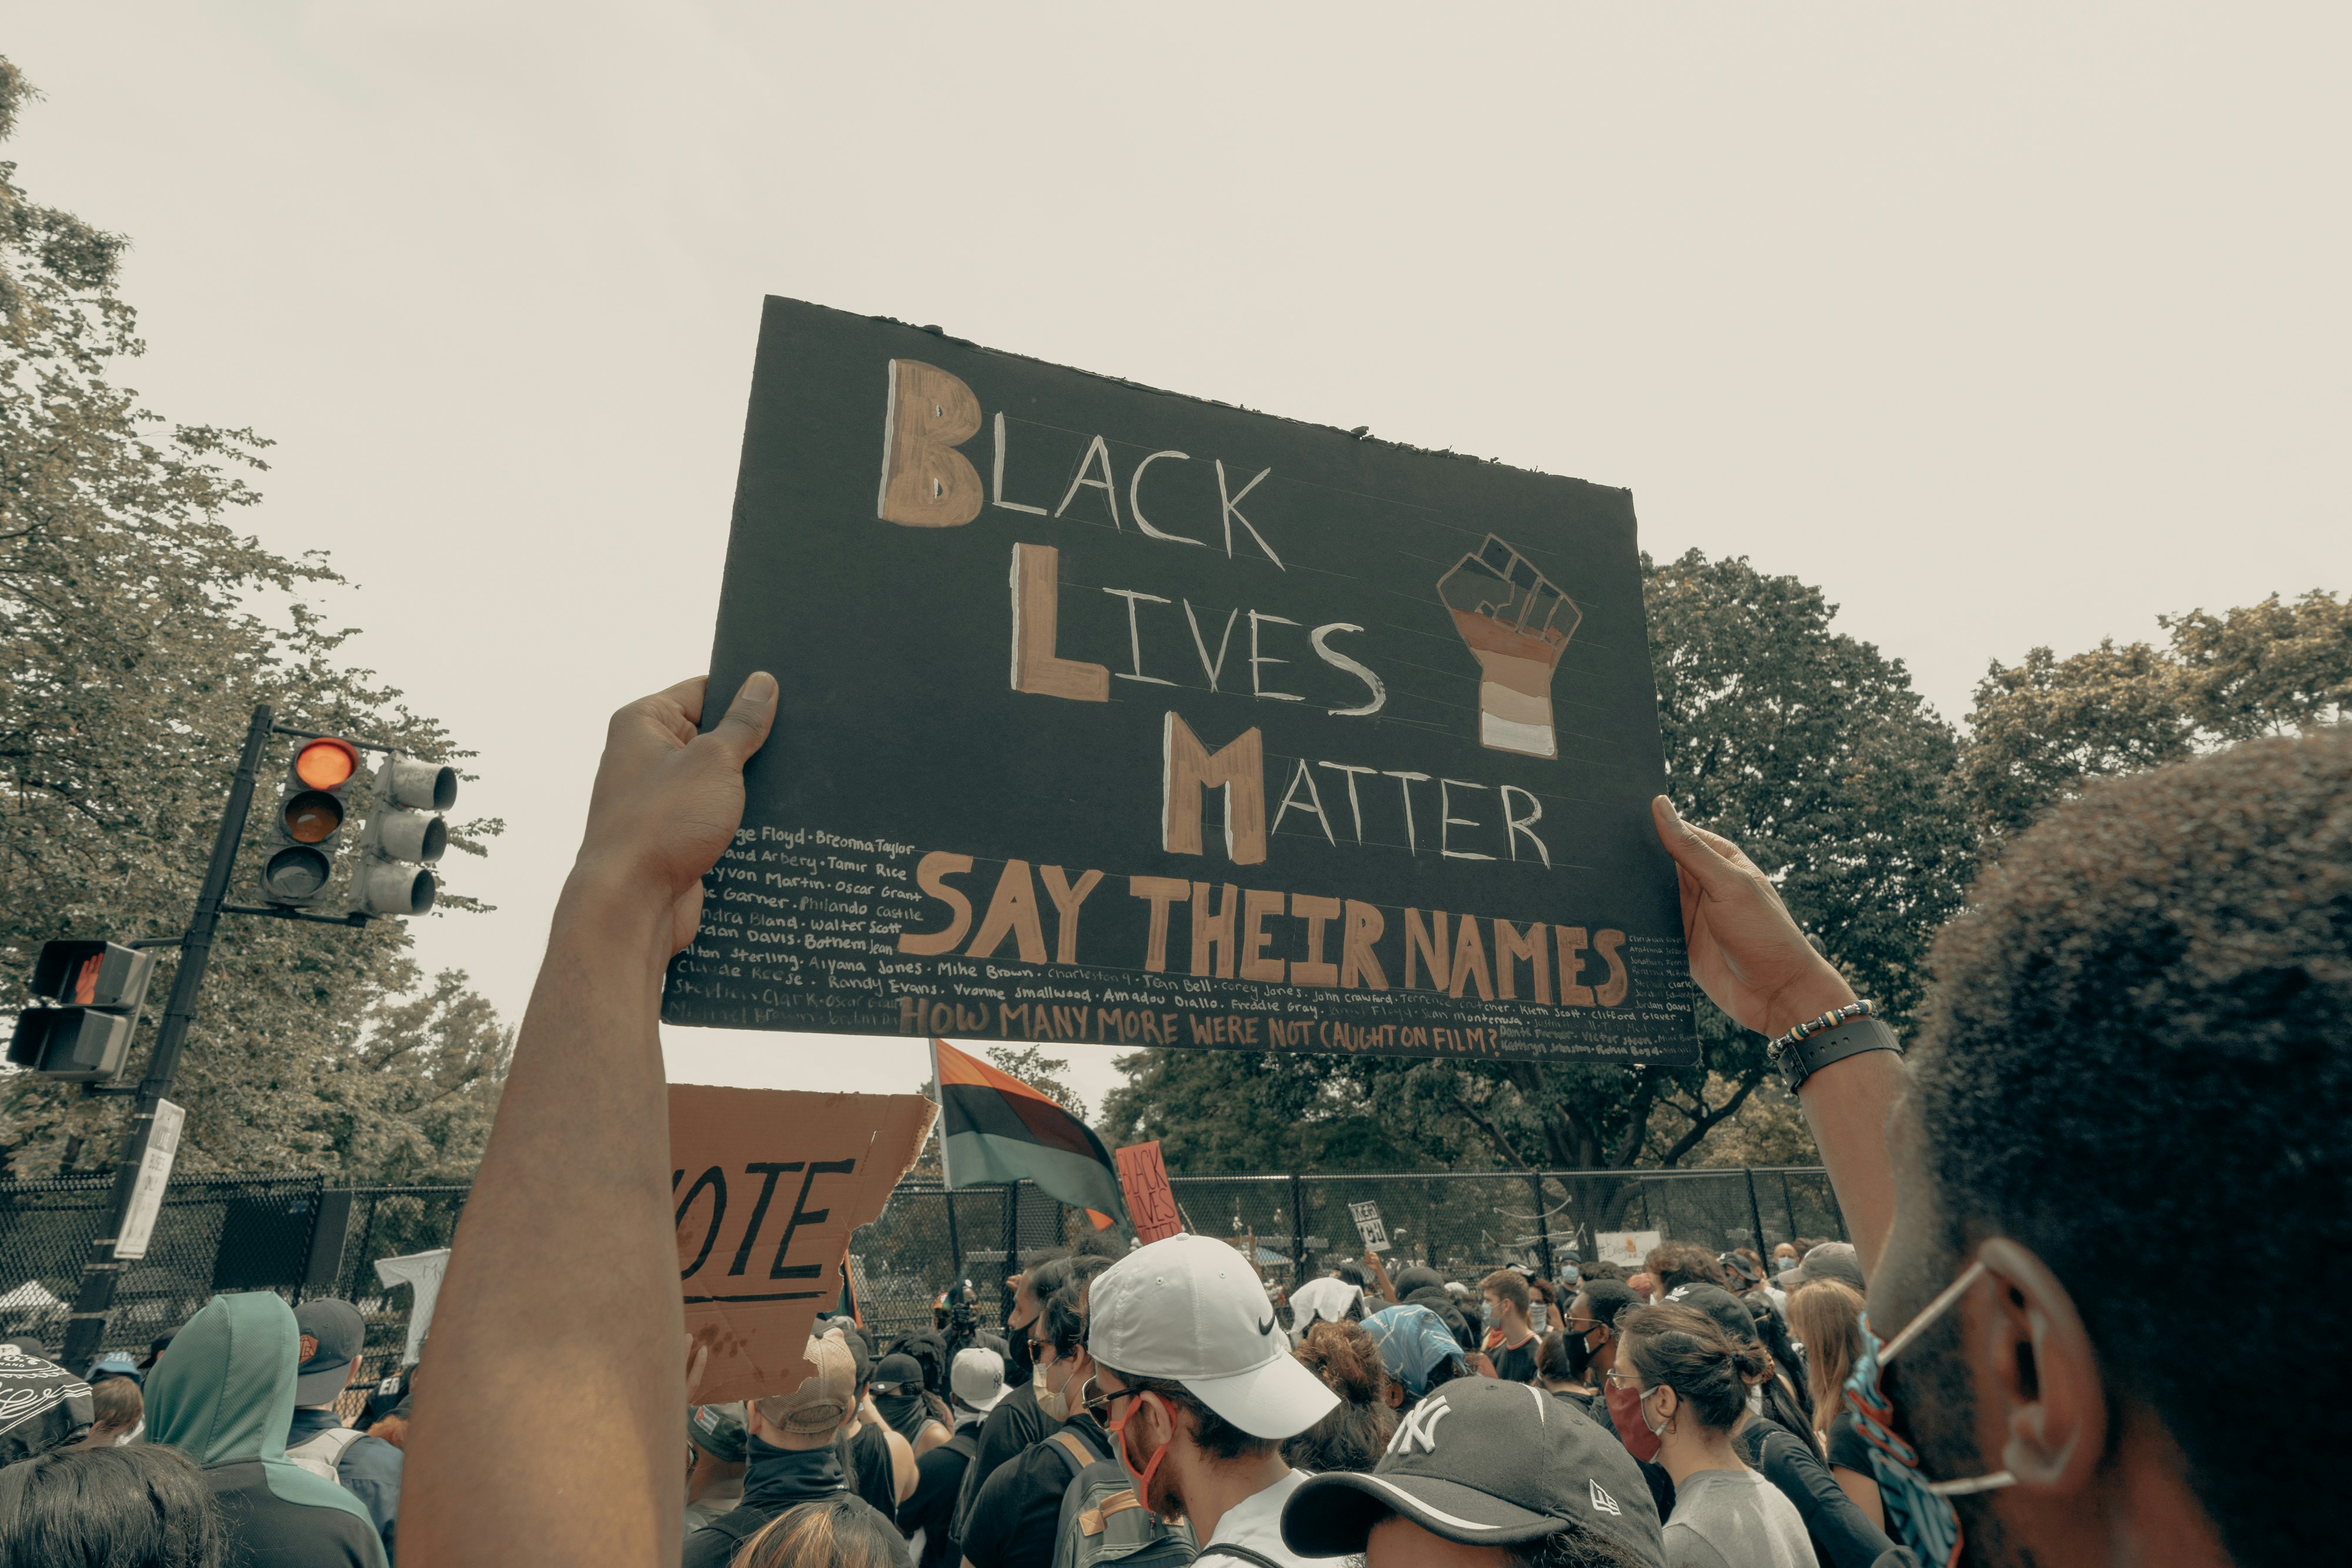 Man holds up a sign at the Black Lives Matter protest in Washington DC 6/6/2020 (IG: @clay.banks)